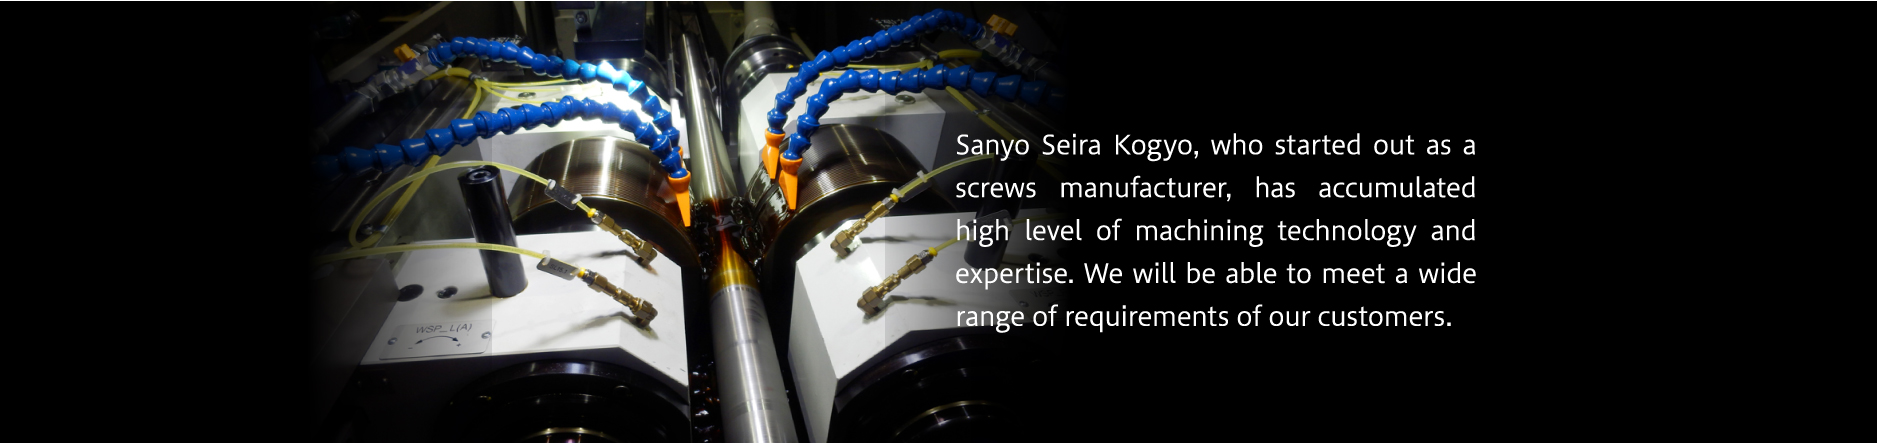 Sanyo Seira Kogyo, who started out as a screws manufacture, has accumulated high level of machining technology and expertise. We will be able to meet a wide range of requirements of our customers.